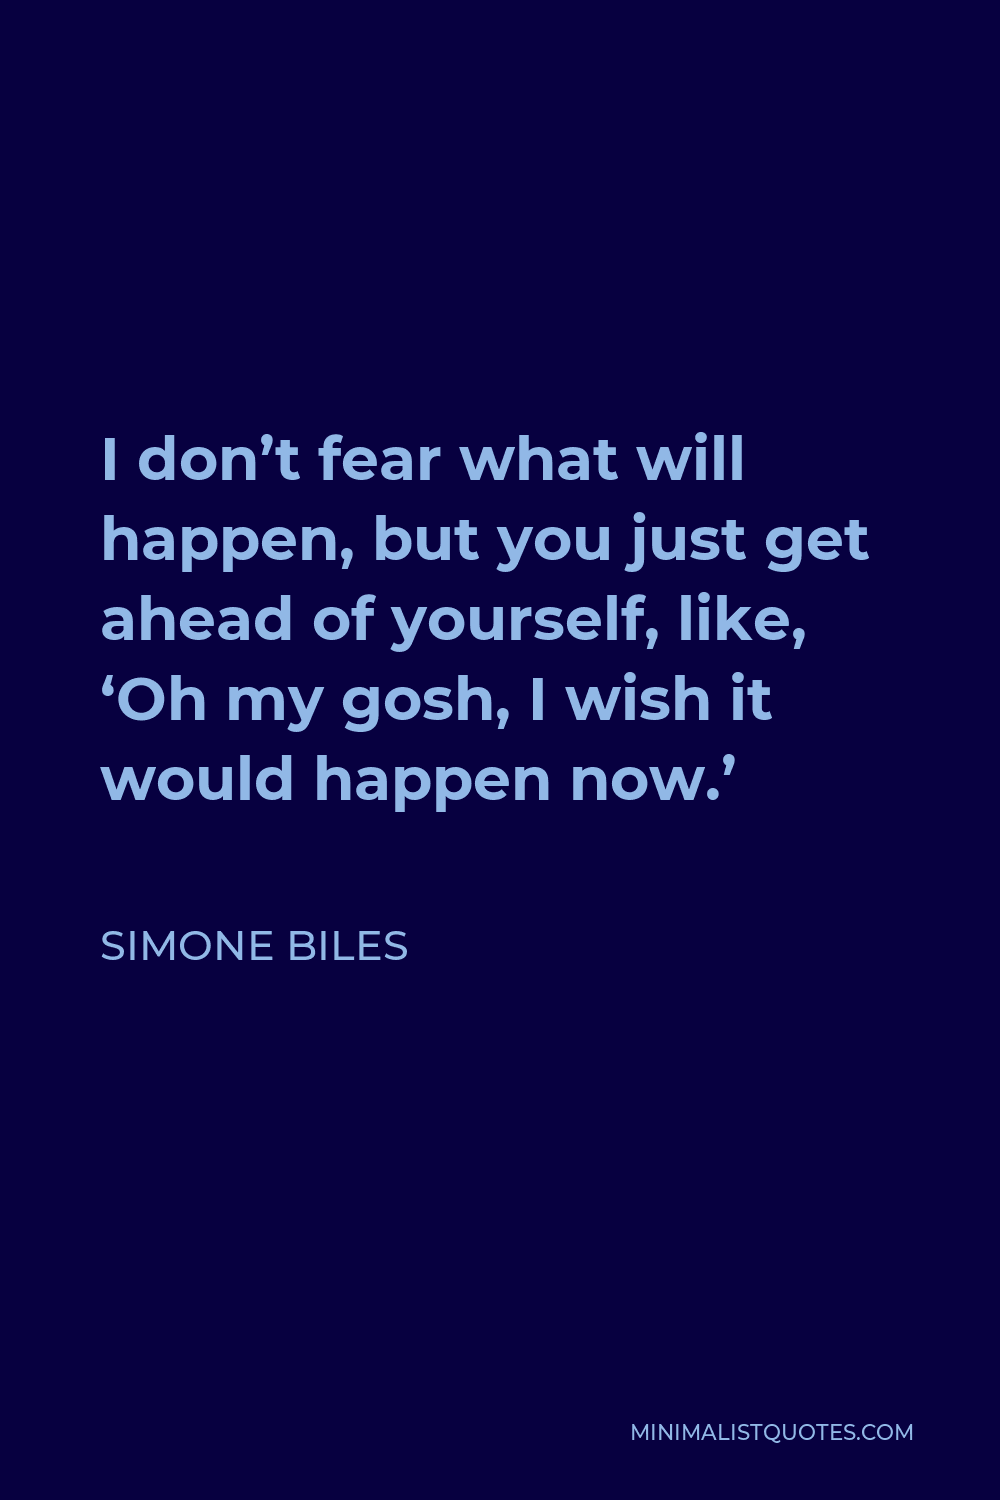 Simone Biles Quote - I don’t fear what will happen, but you just get ahead of yourself, like, ‘Oh my gosh, I wish it would happen now.’